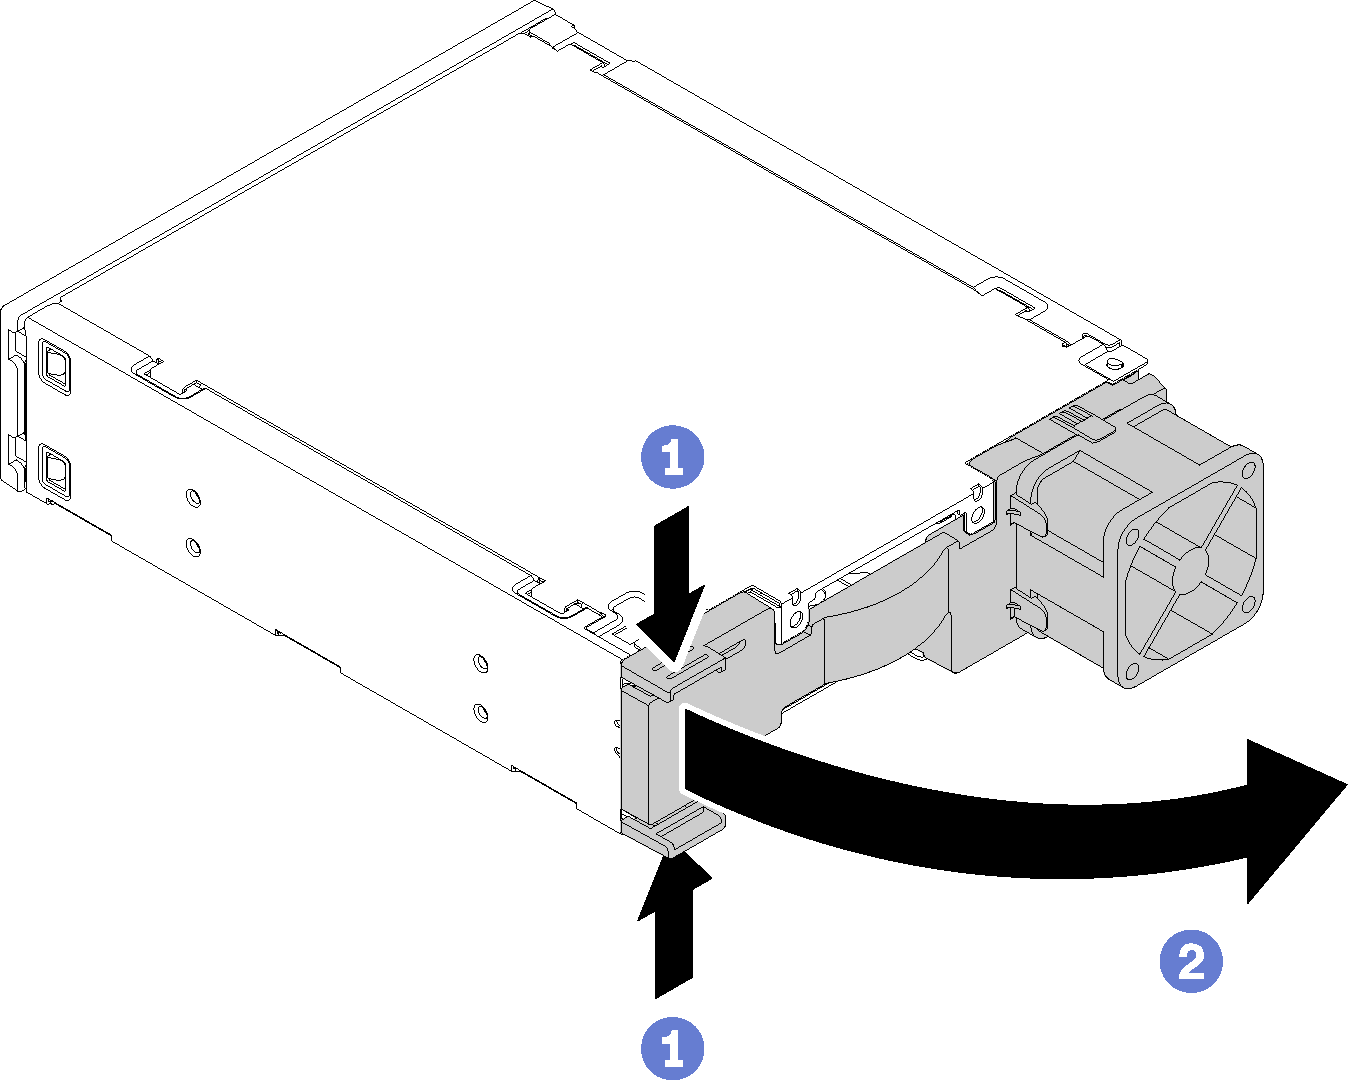 Opening the latch of the adapter assembly